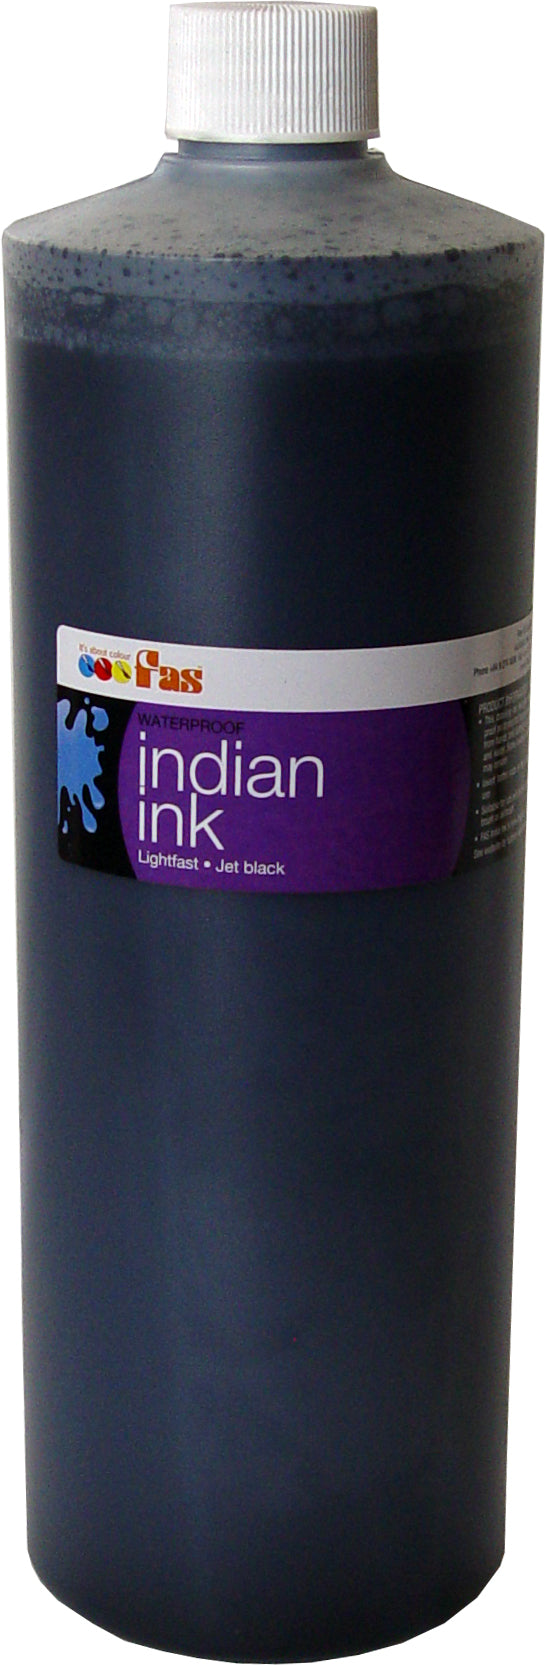 Fas Non Toxic Permanent Waterproof Ink India